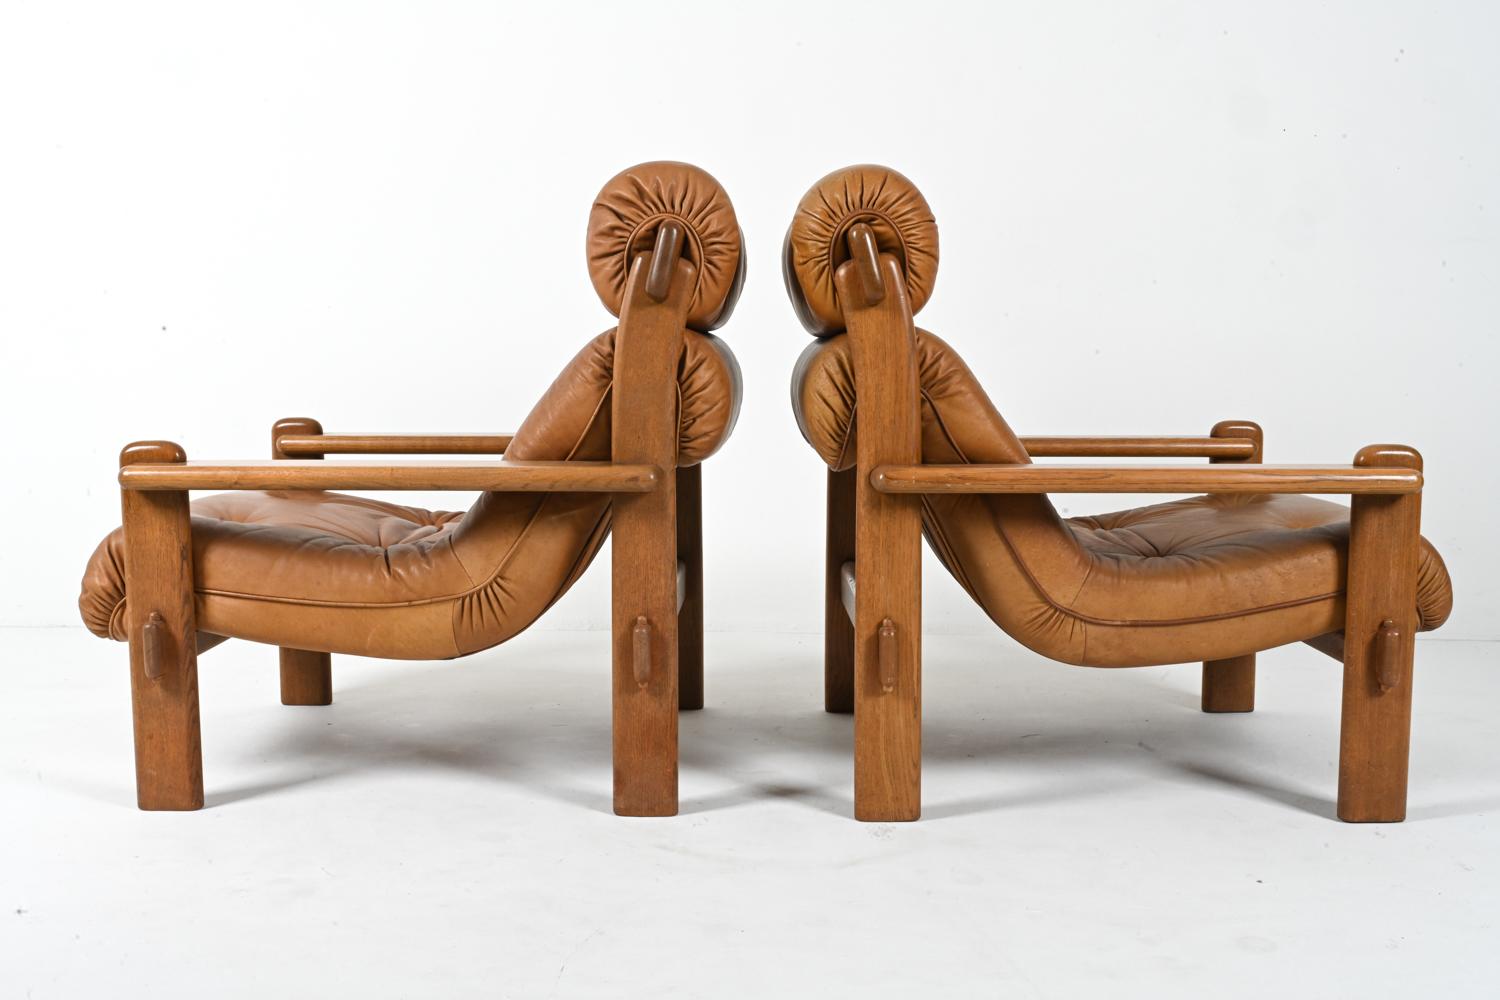 Pair of European Brutalist Armchairs in Oak & Leather, c. 1970's For Sale 8